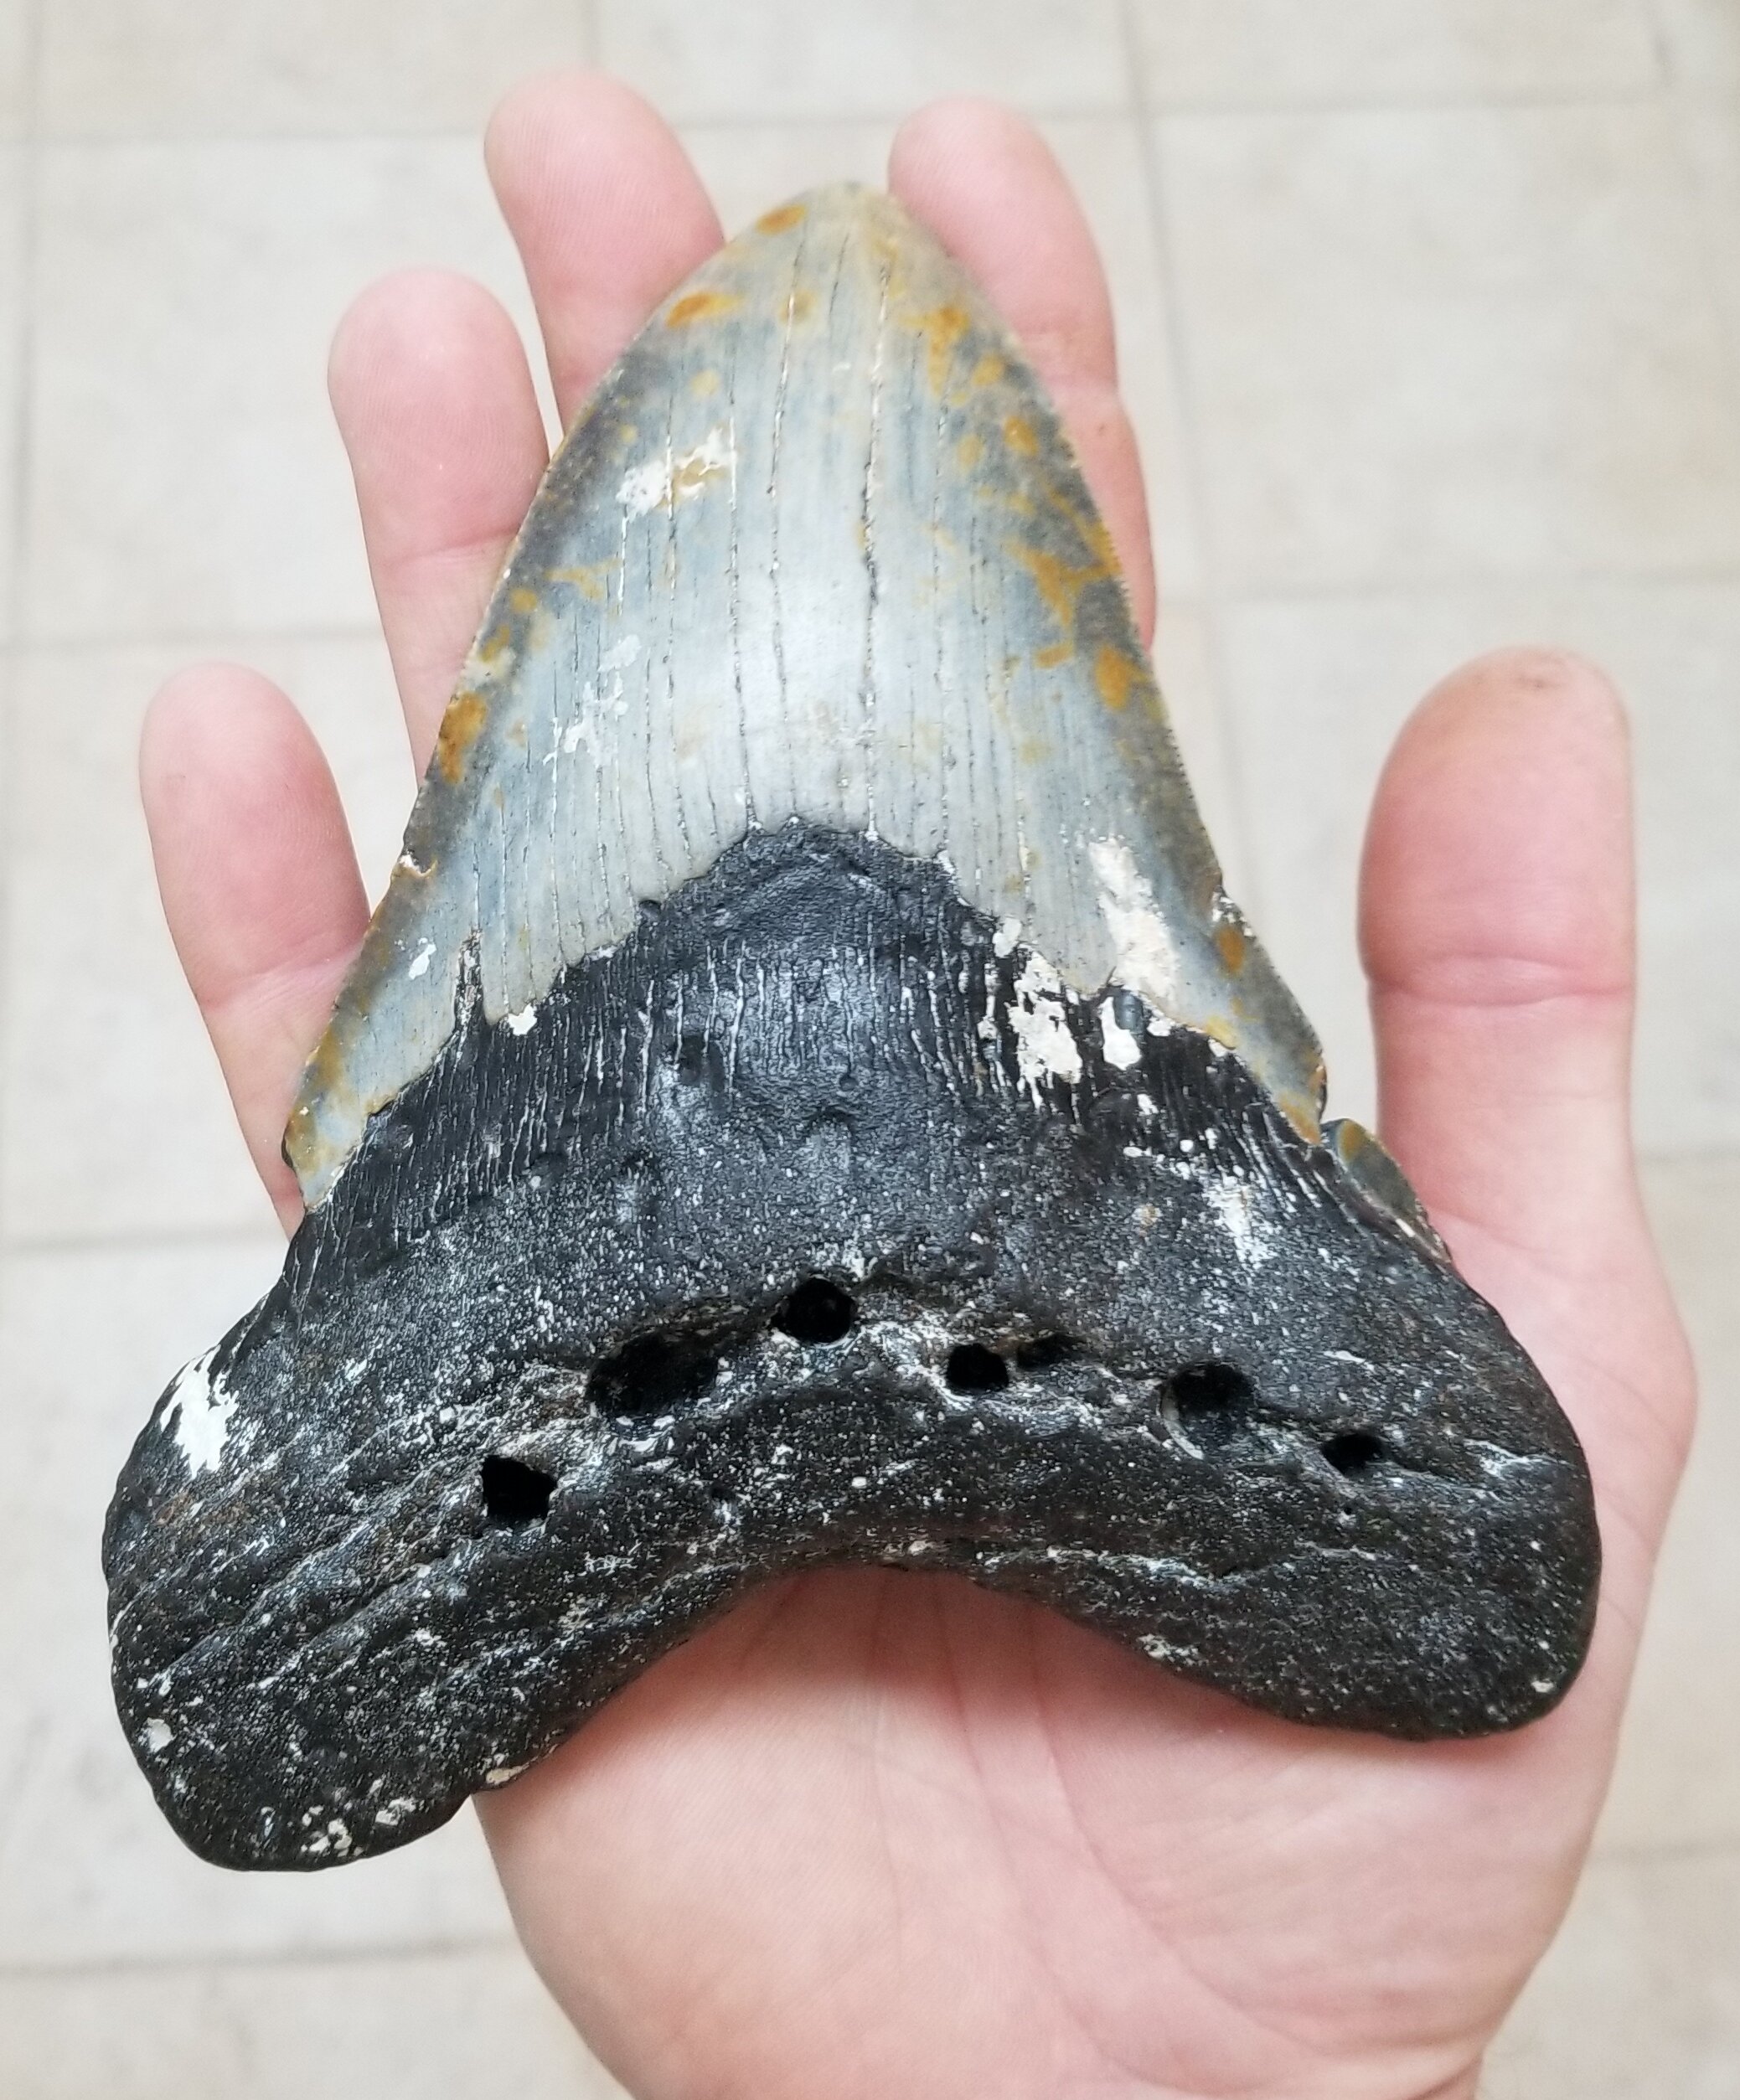 What did Megalodon eat? Anything it wanted, including other predators